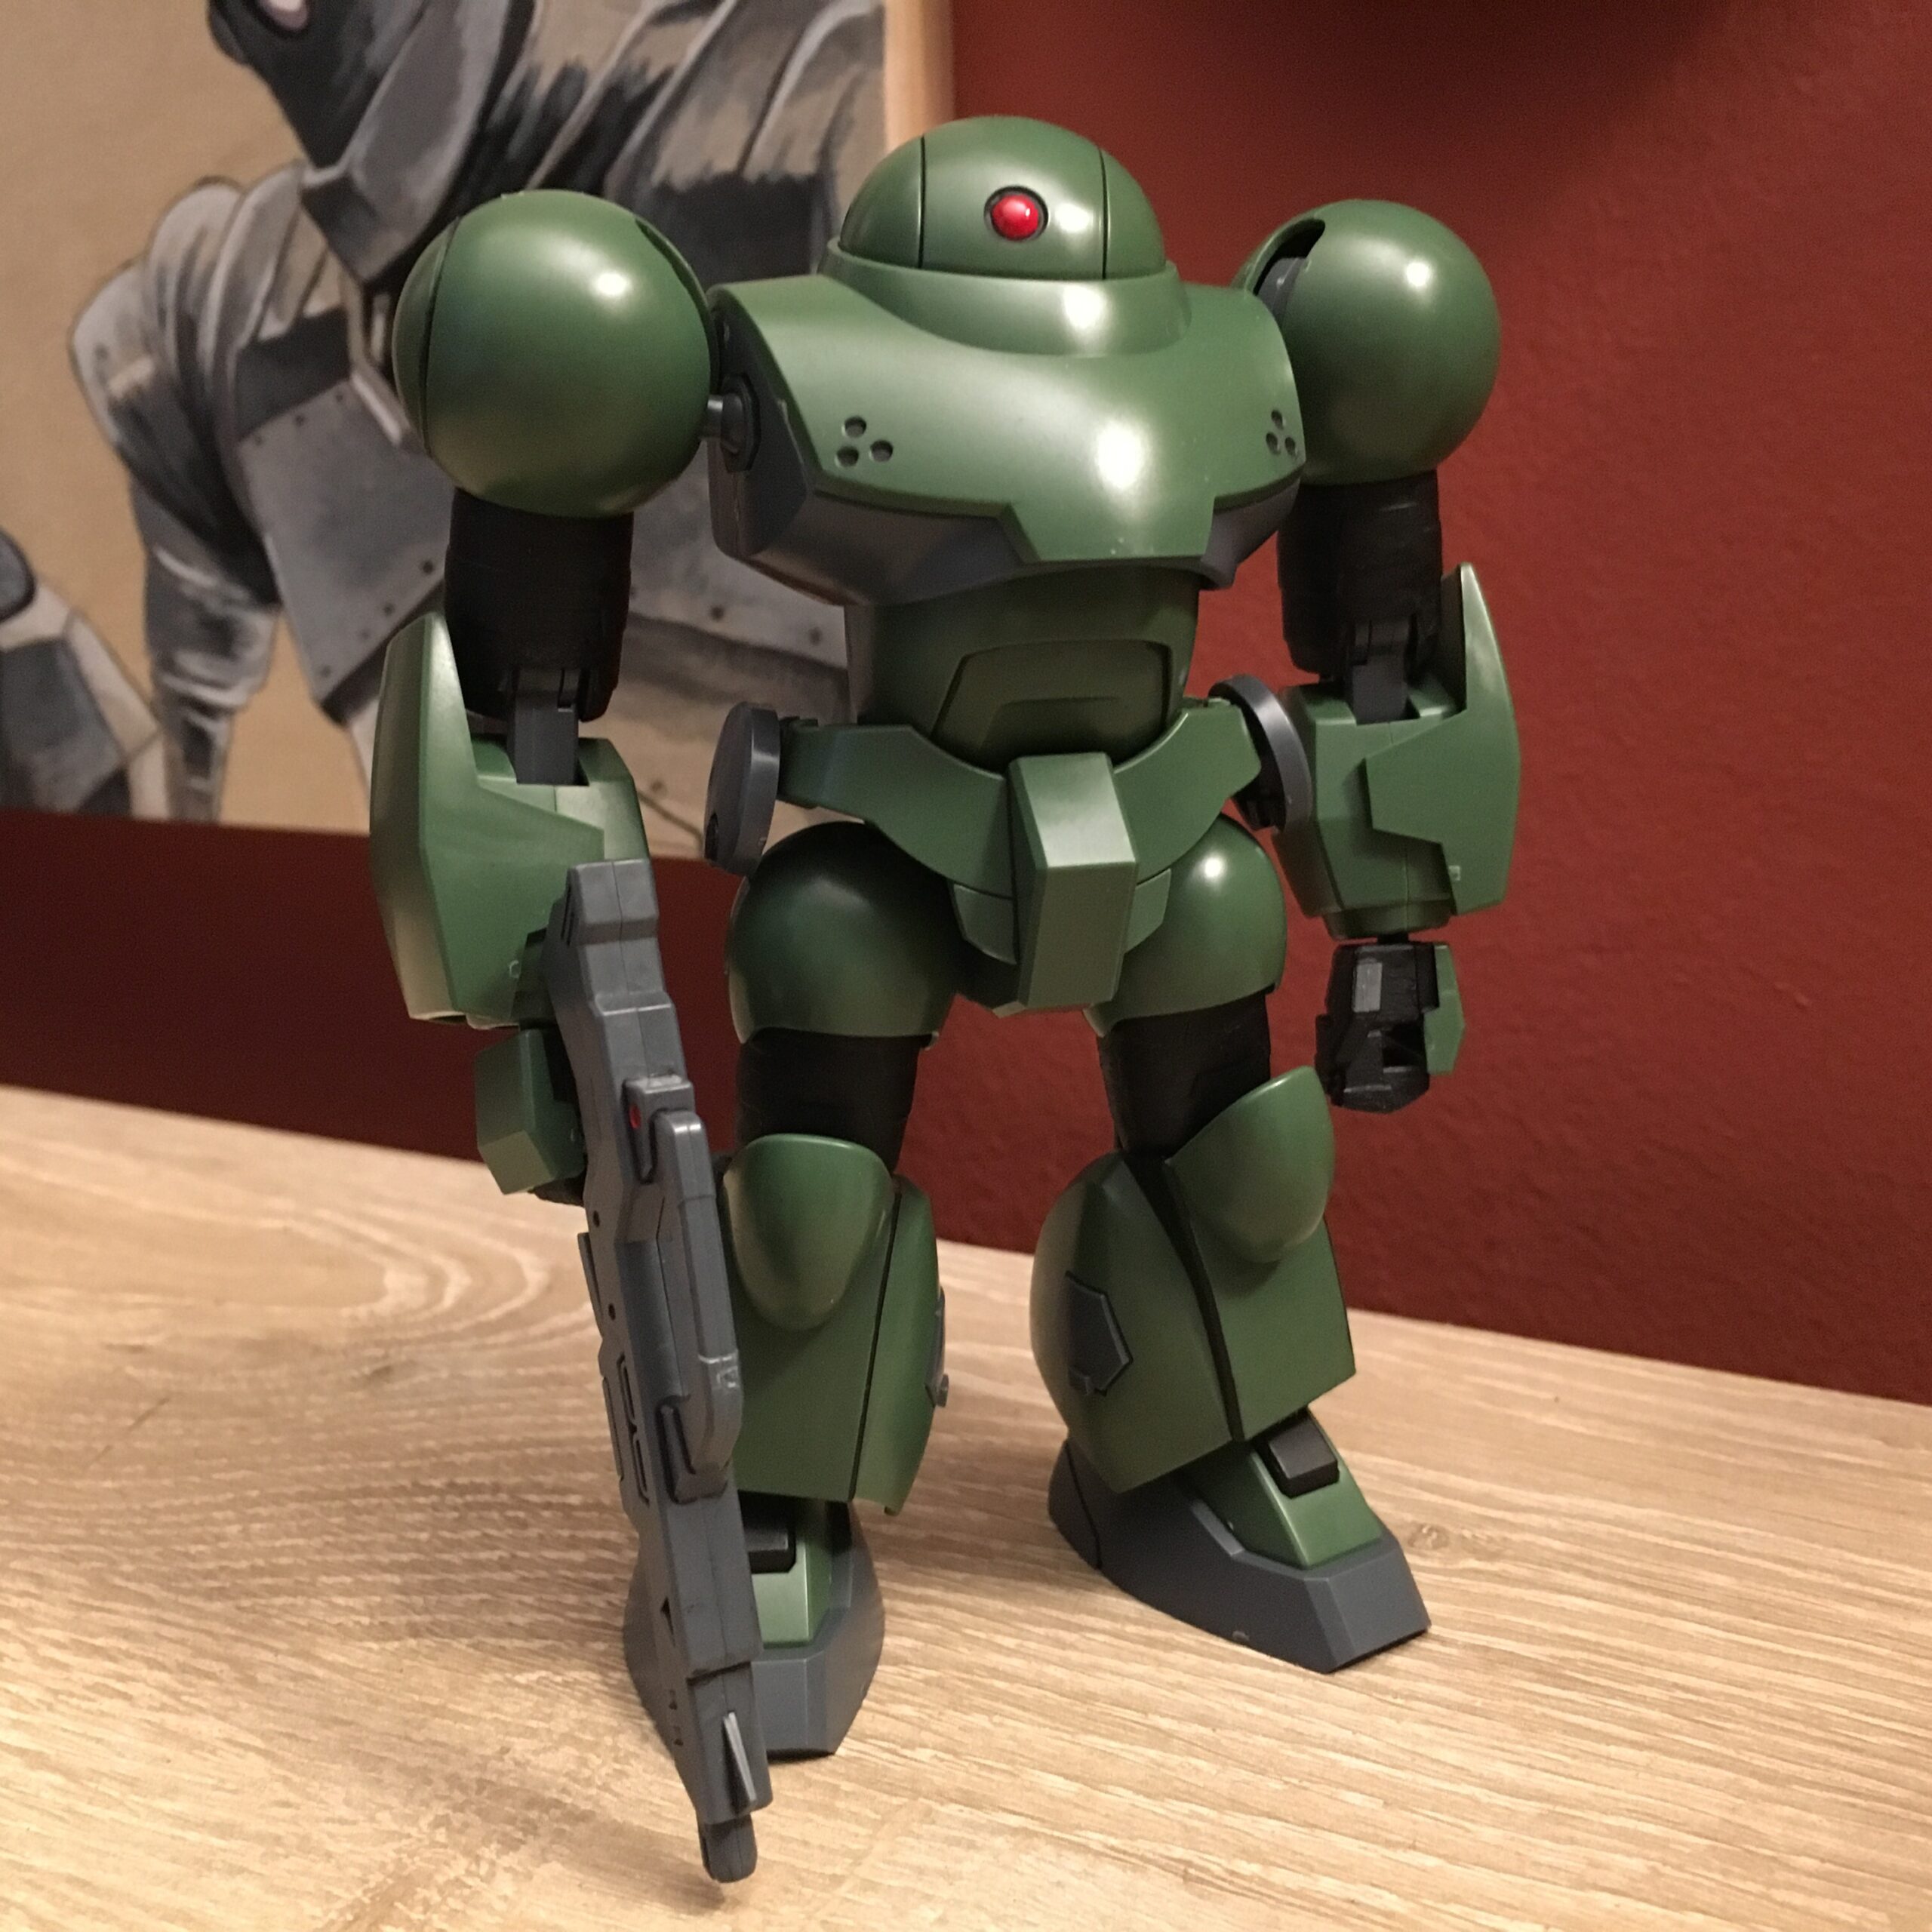 A dark green mobile suit model from Mobile Suit Gundam.